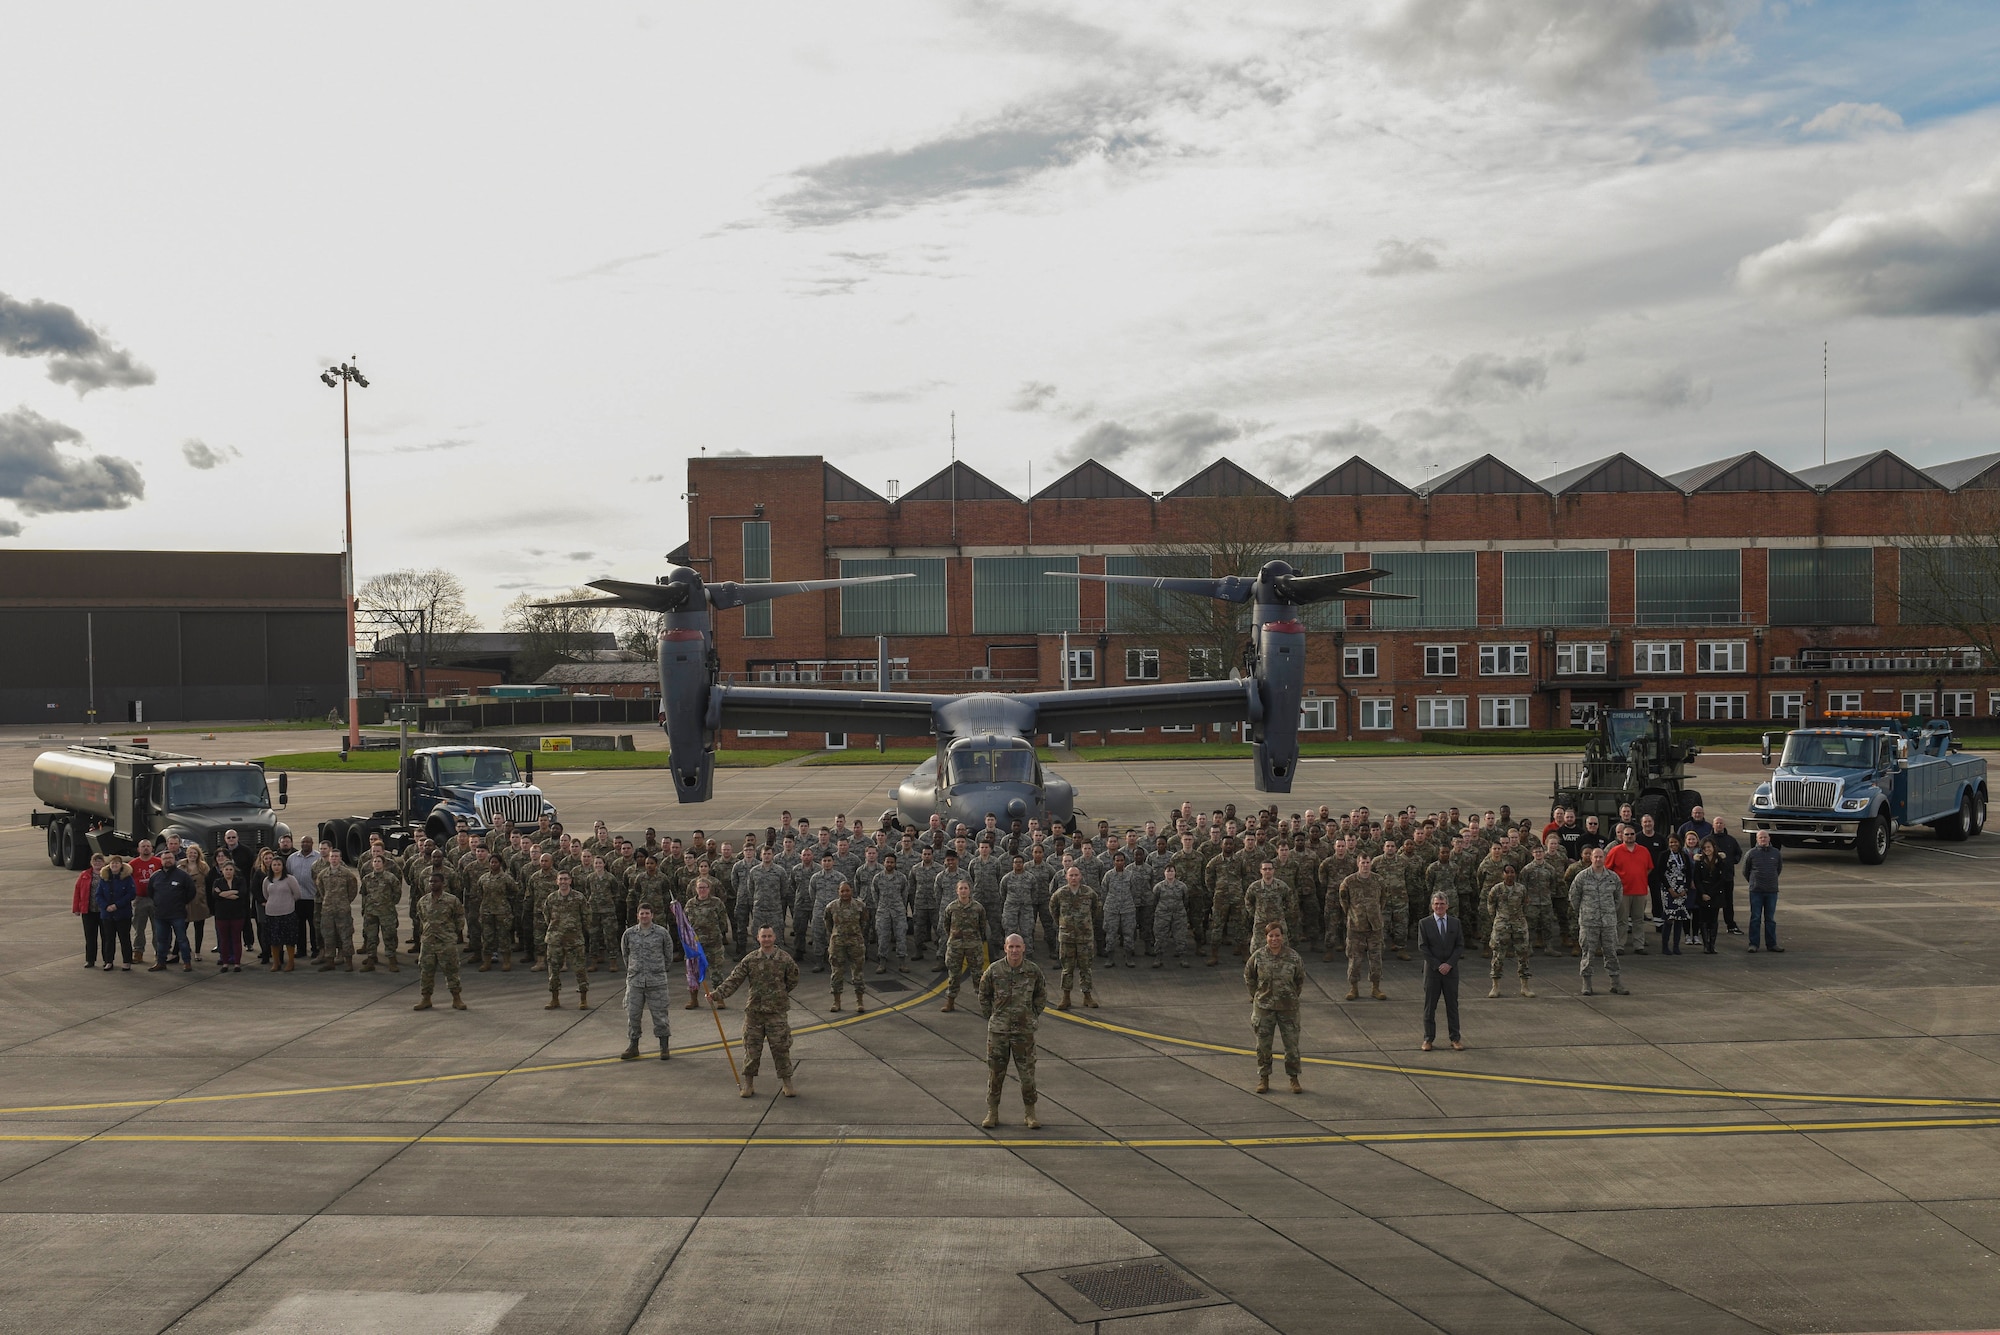 Airmen of the 100th Logistics Readiness Squadron pose for a squadron photo at RAF Mildenhall, England, March 11, 2020. The 100th LRS was awarded the Major General Warren R. Carter Logistics Readiness Award Daedalian trophy for United States Air Forces in Europe - Air Forces Africa. (U.S. Air Force photo by Staff Sgt. Luke Milano)